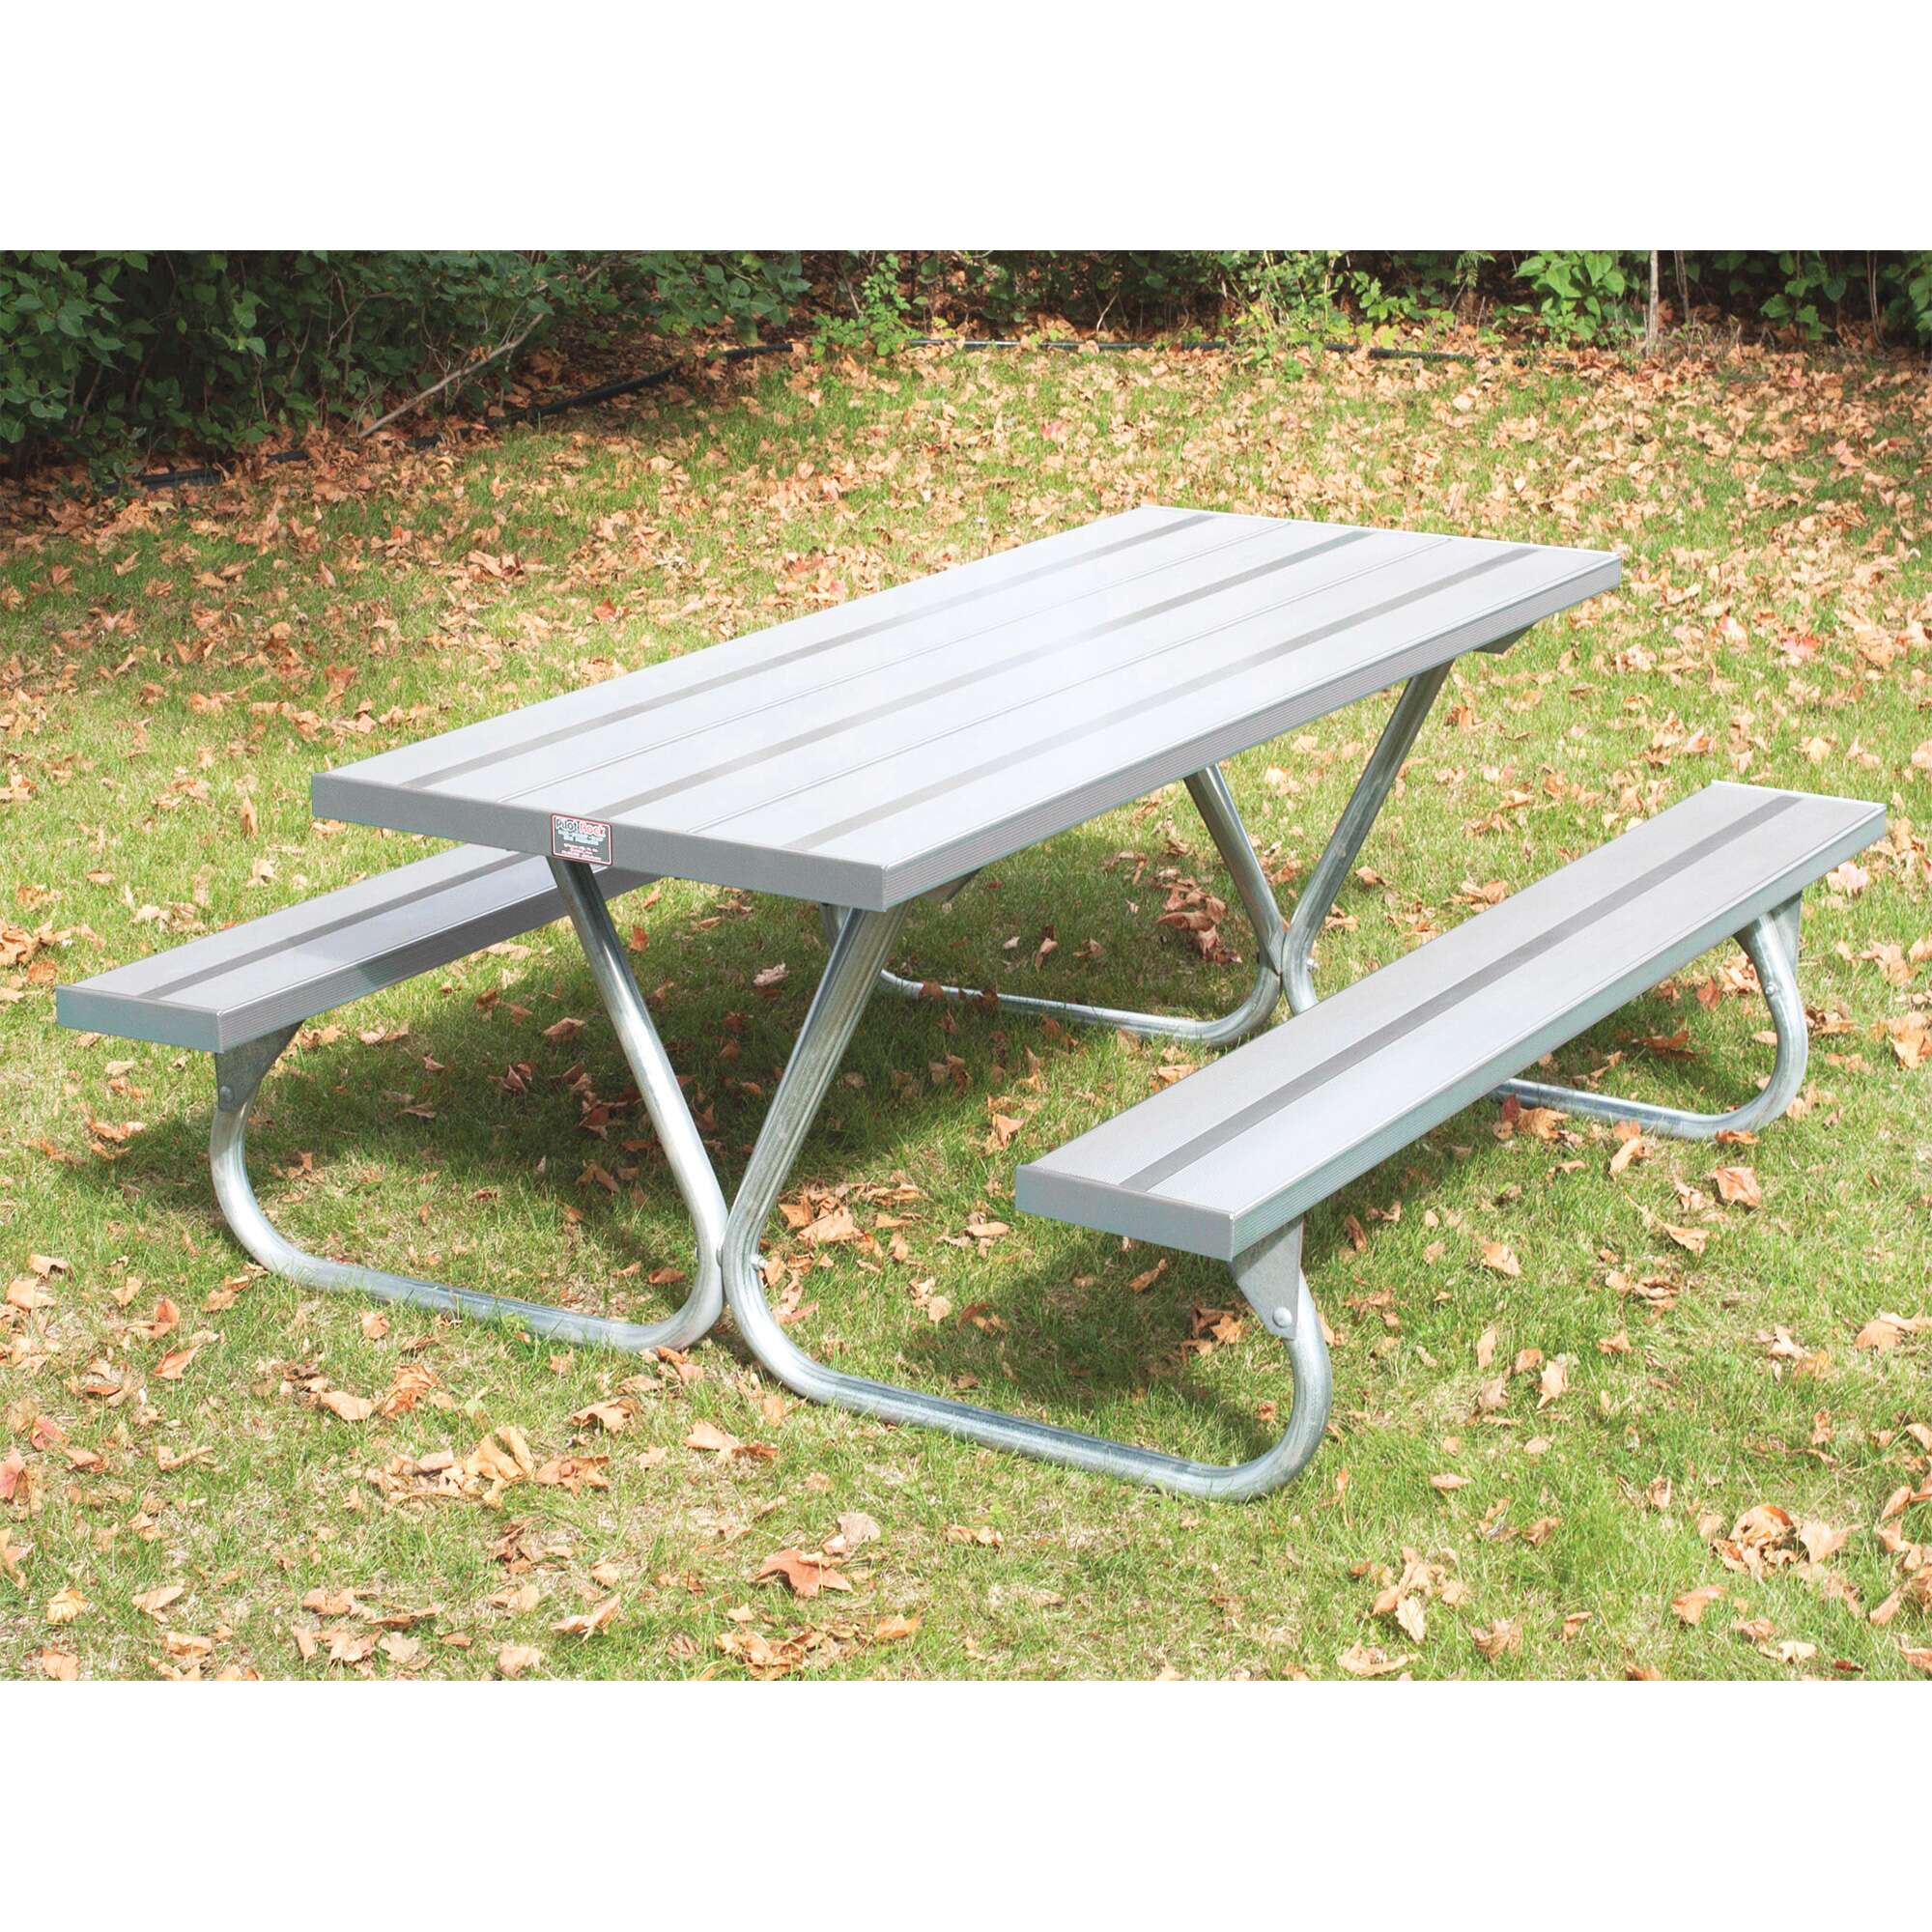 Pilot Rock BTUG Series 8ft Picnic Table with Aluminum Top 96in L x 58inW x 29in H